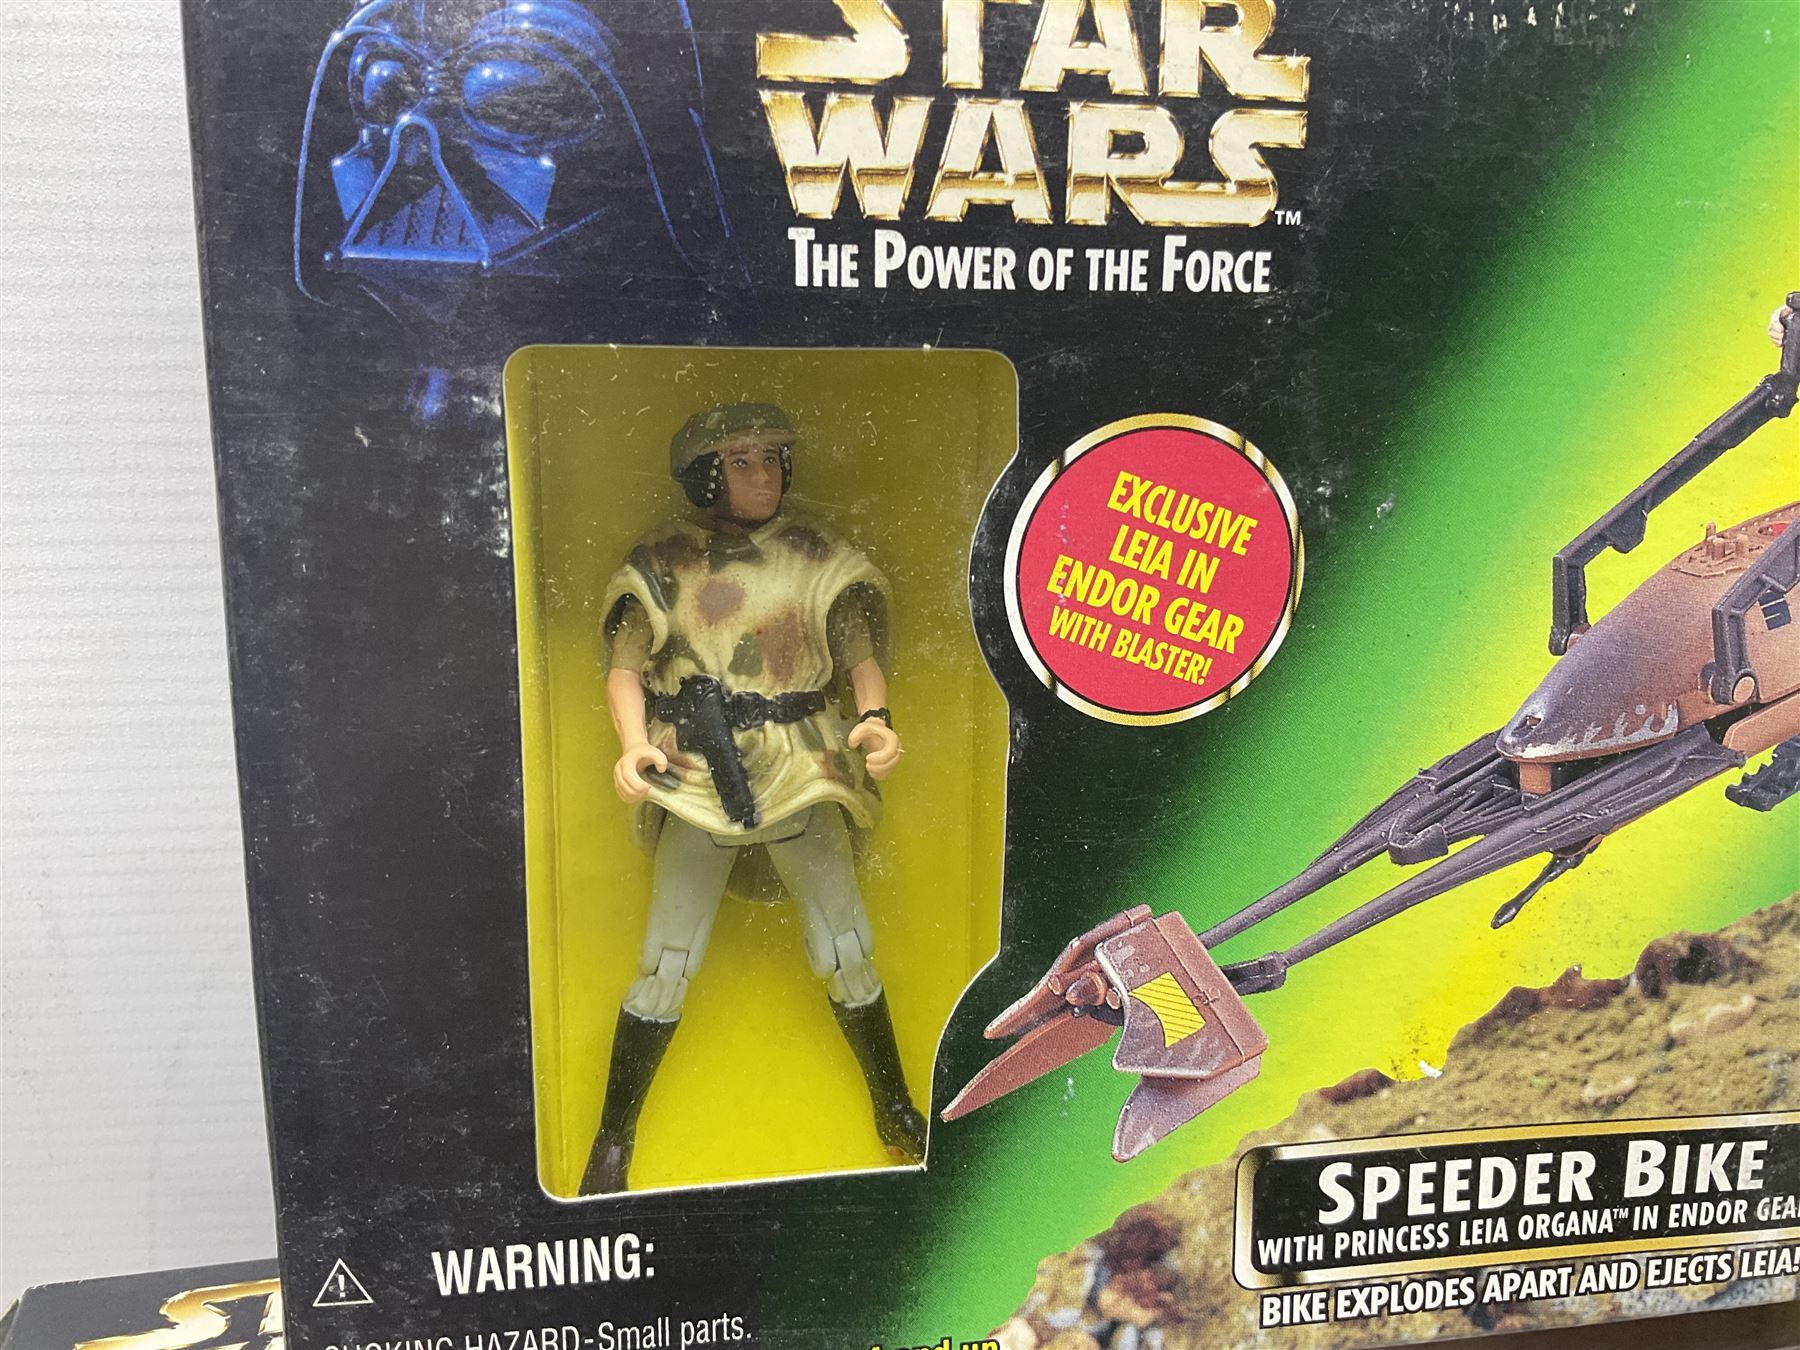 Star Wars - The Power of the Force - Cruisemissile Trooper; two x Jabba's Palace; Jabba the Hutt's D - Image 5 of 10